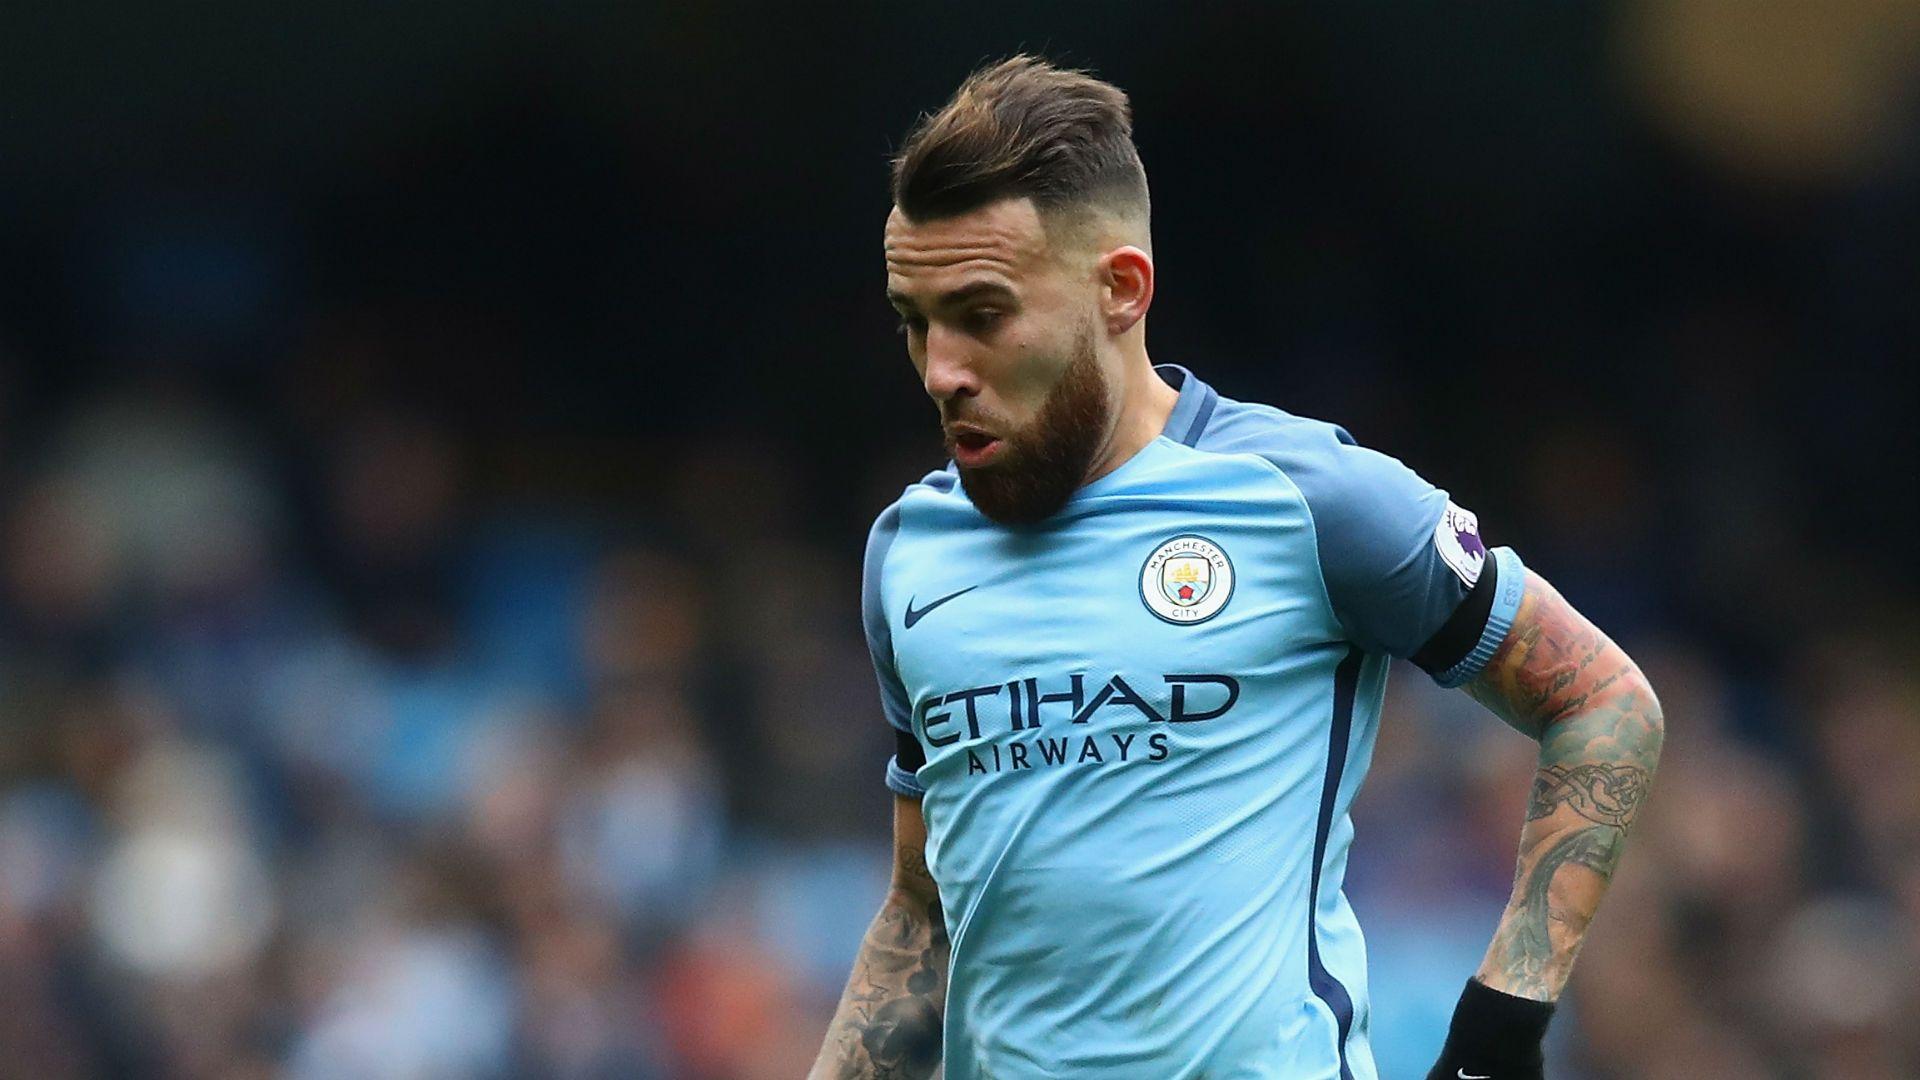 Otamendi offered a move to Real Madrid. Inside Manchester City